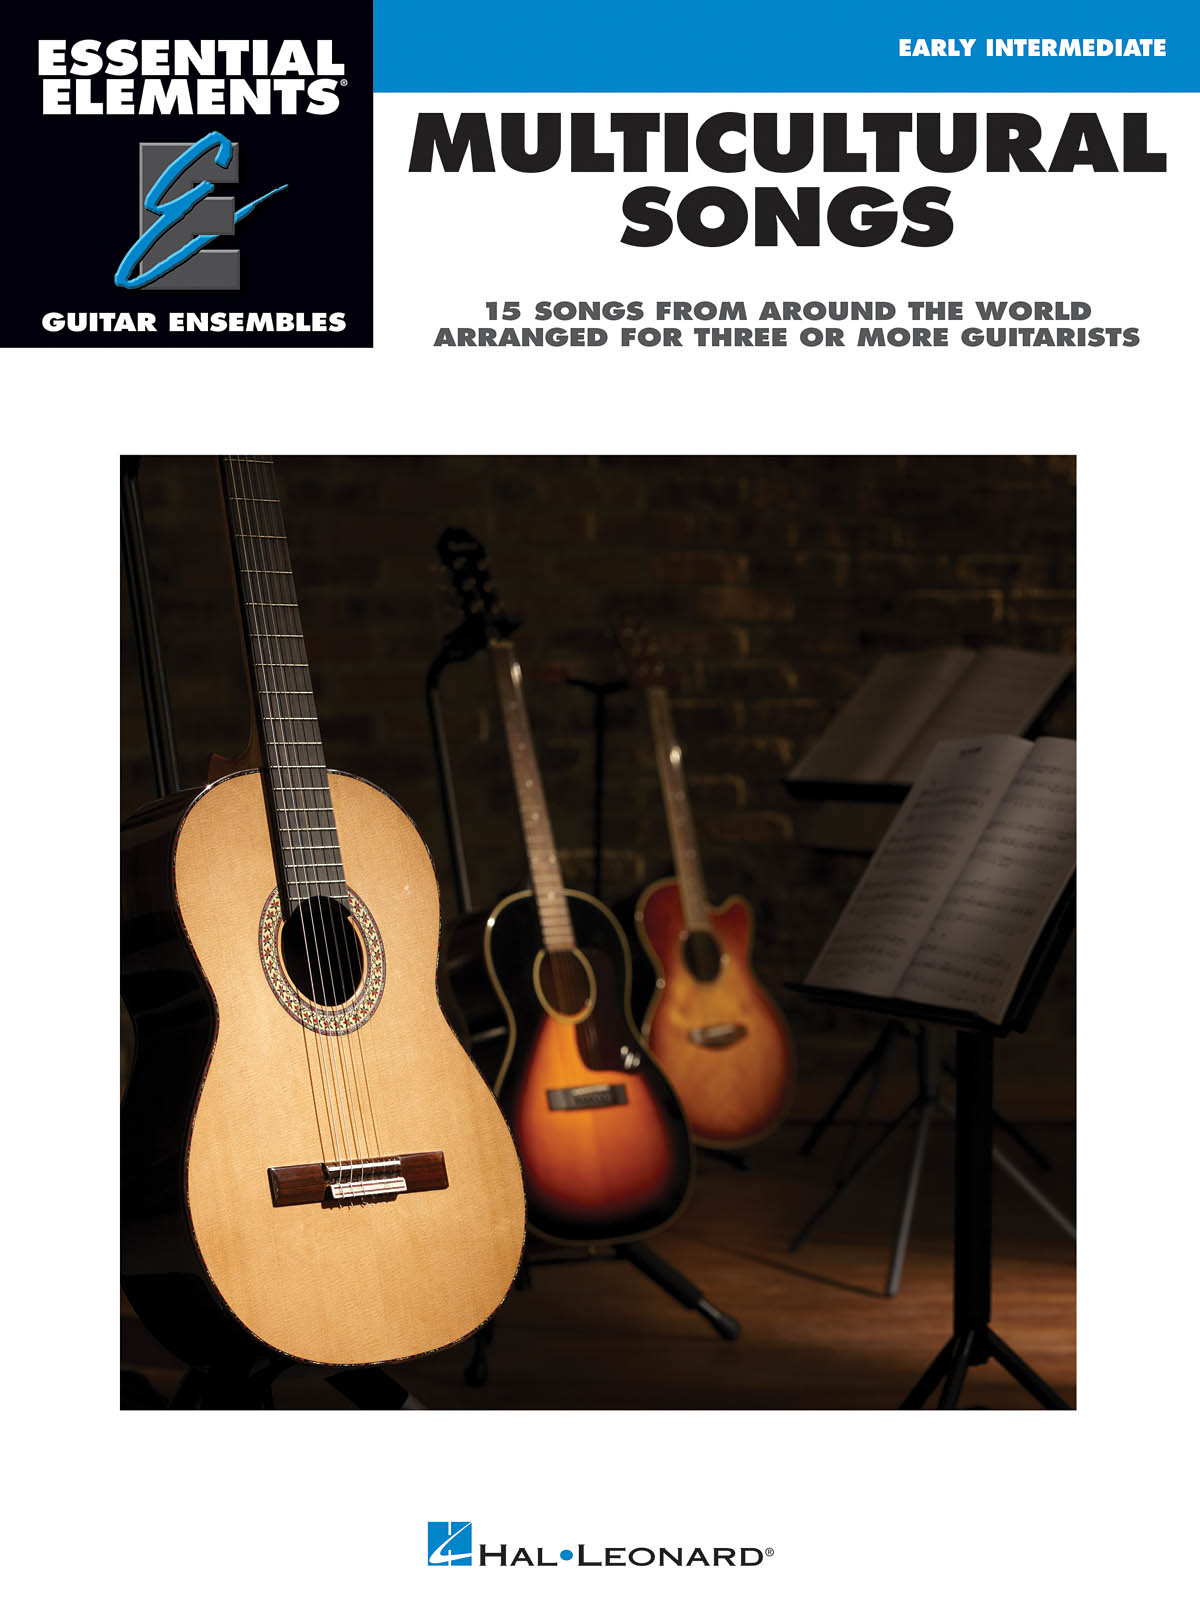 Essential Elements Guitar Ens -Multicultural Songs - 15 Songs from Around the World Arranged for Three or More Guitarists - noty pro kytarový soubor